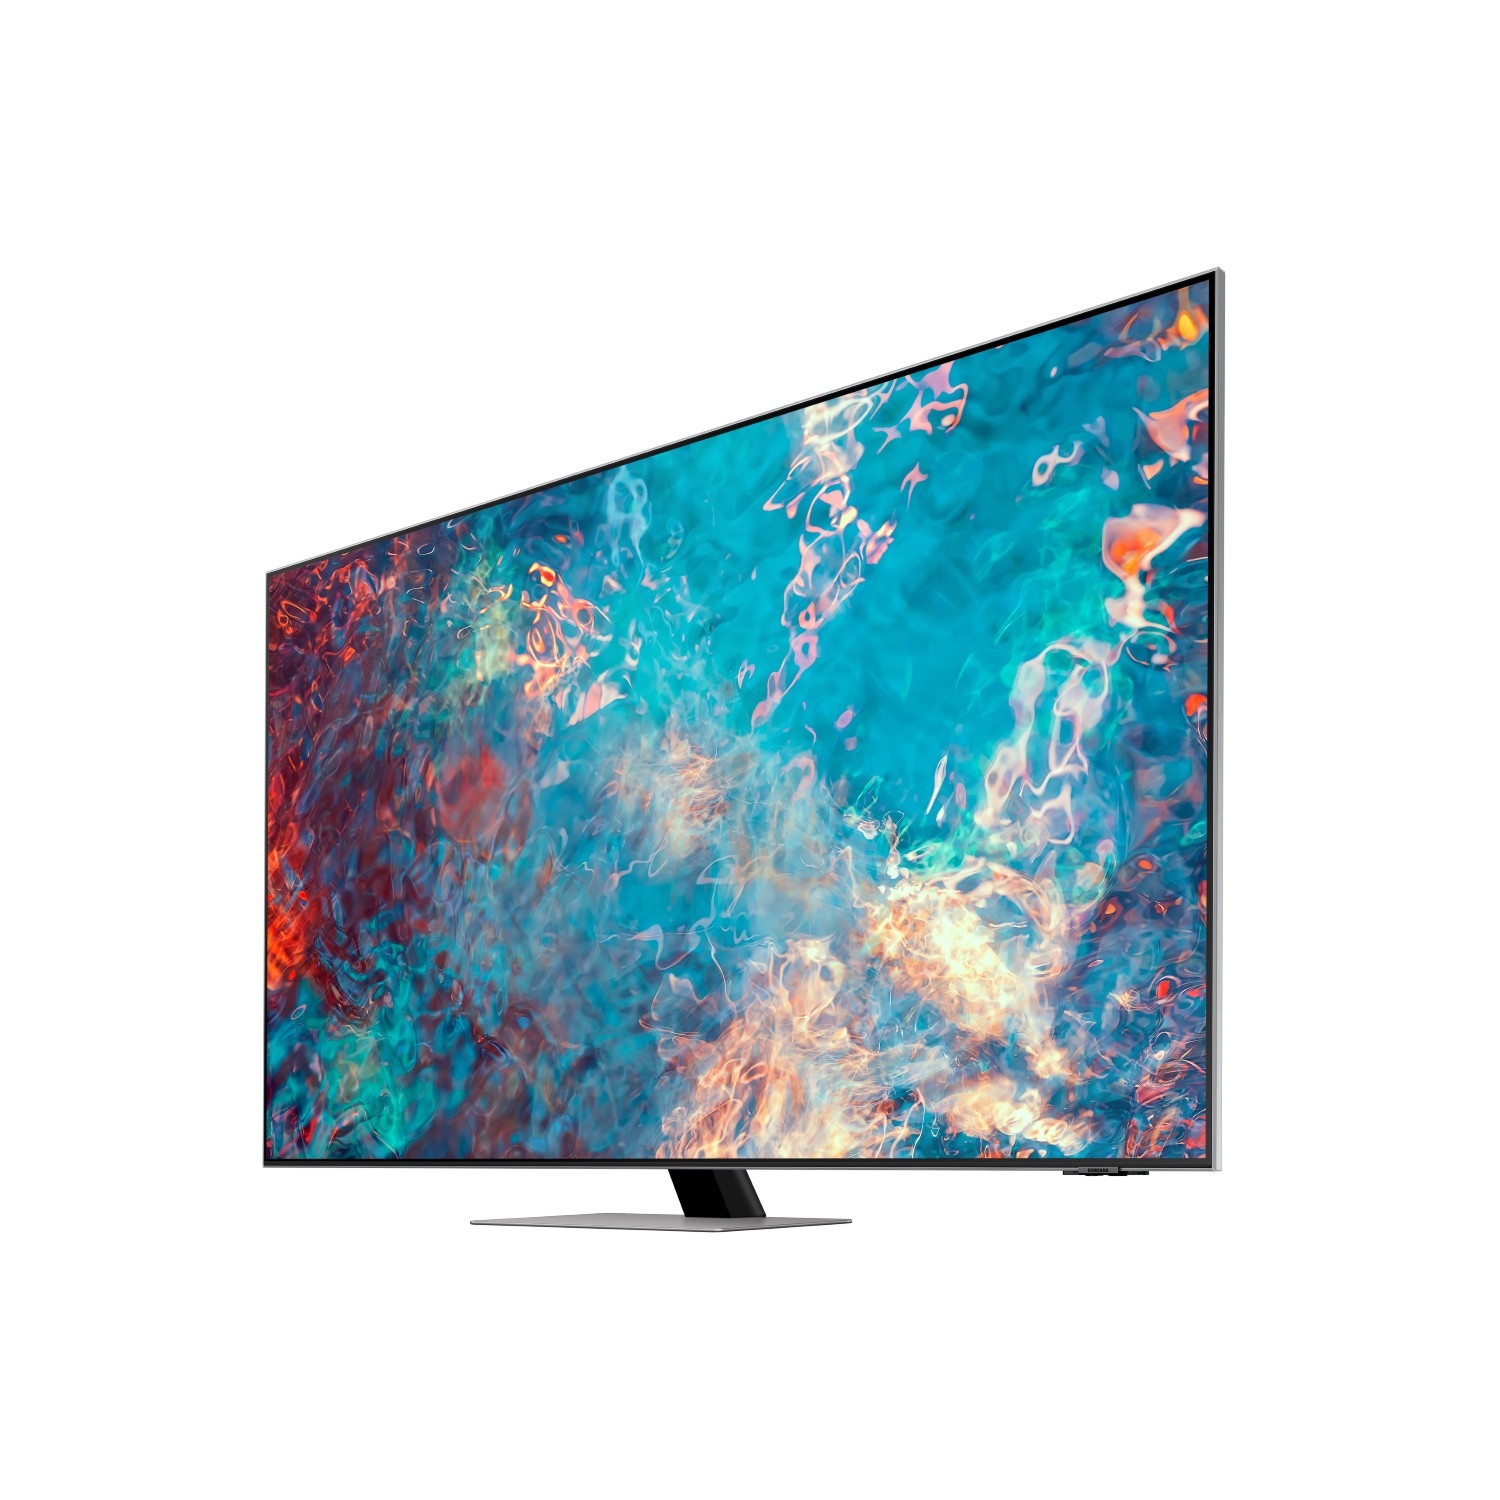 Samsung QE55QN85AATXXU 55" 4K Neo QLED Smart TV Quantum Matrix Technology,Quantum HDR 1500 powered by HDR10+ with Wide Viewing Angle - 7